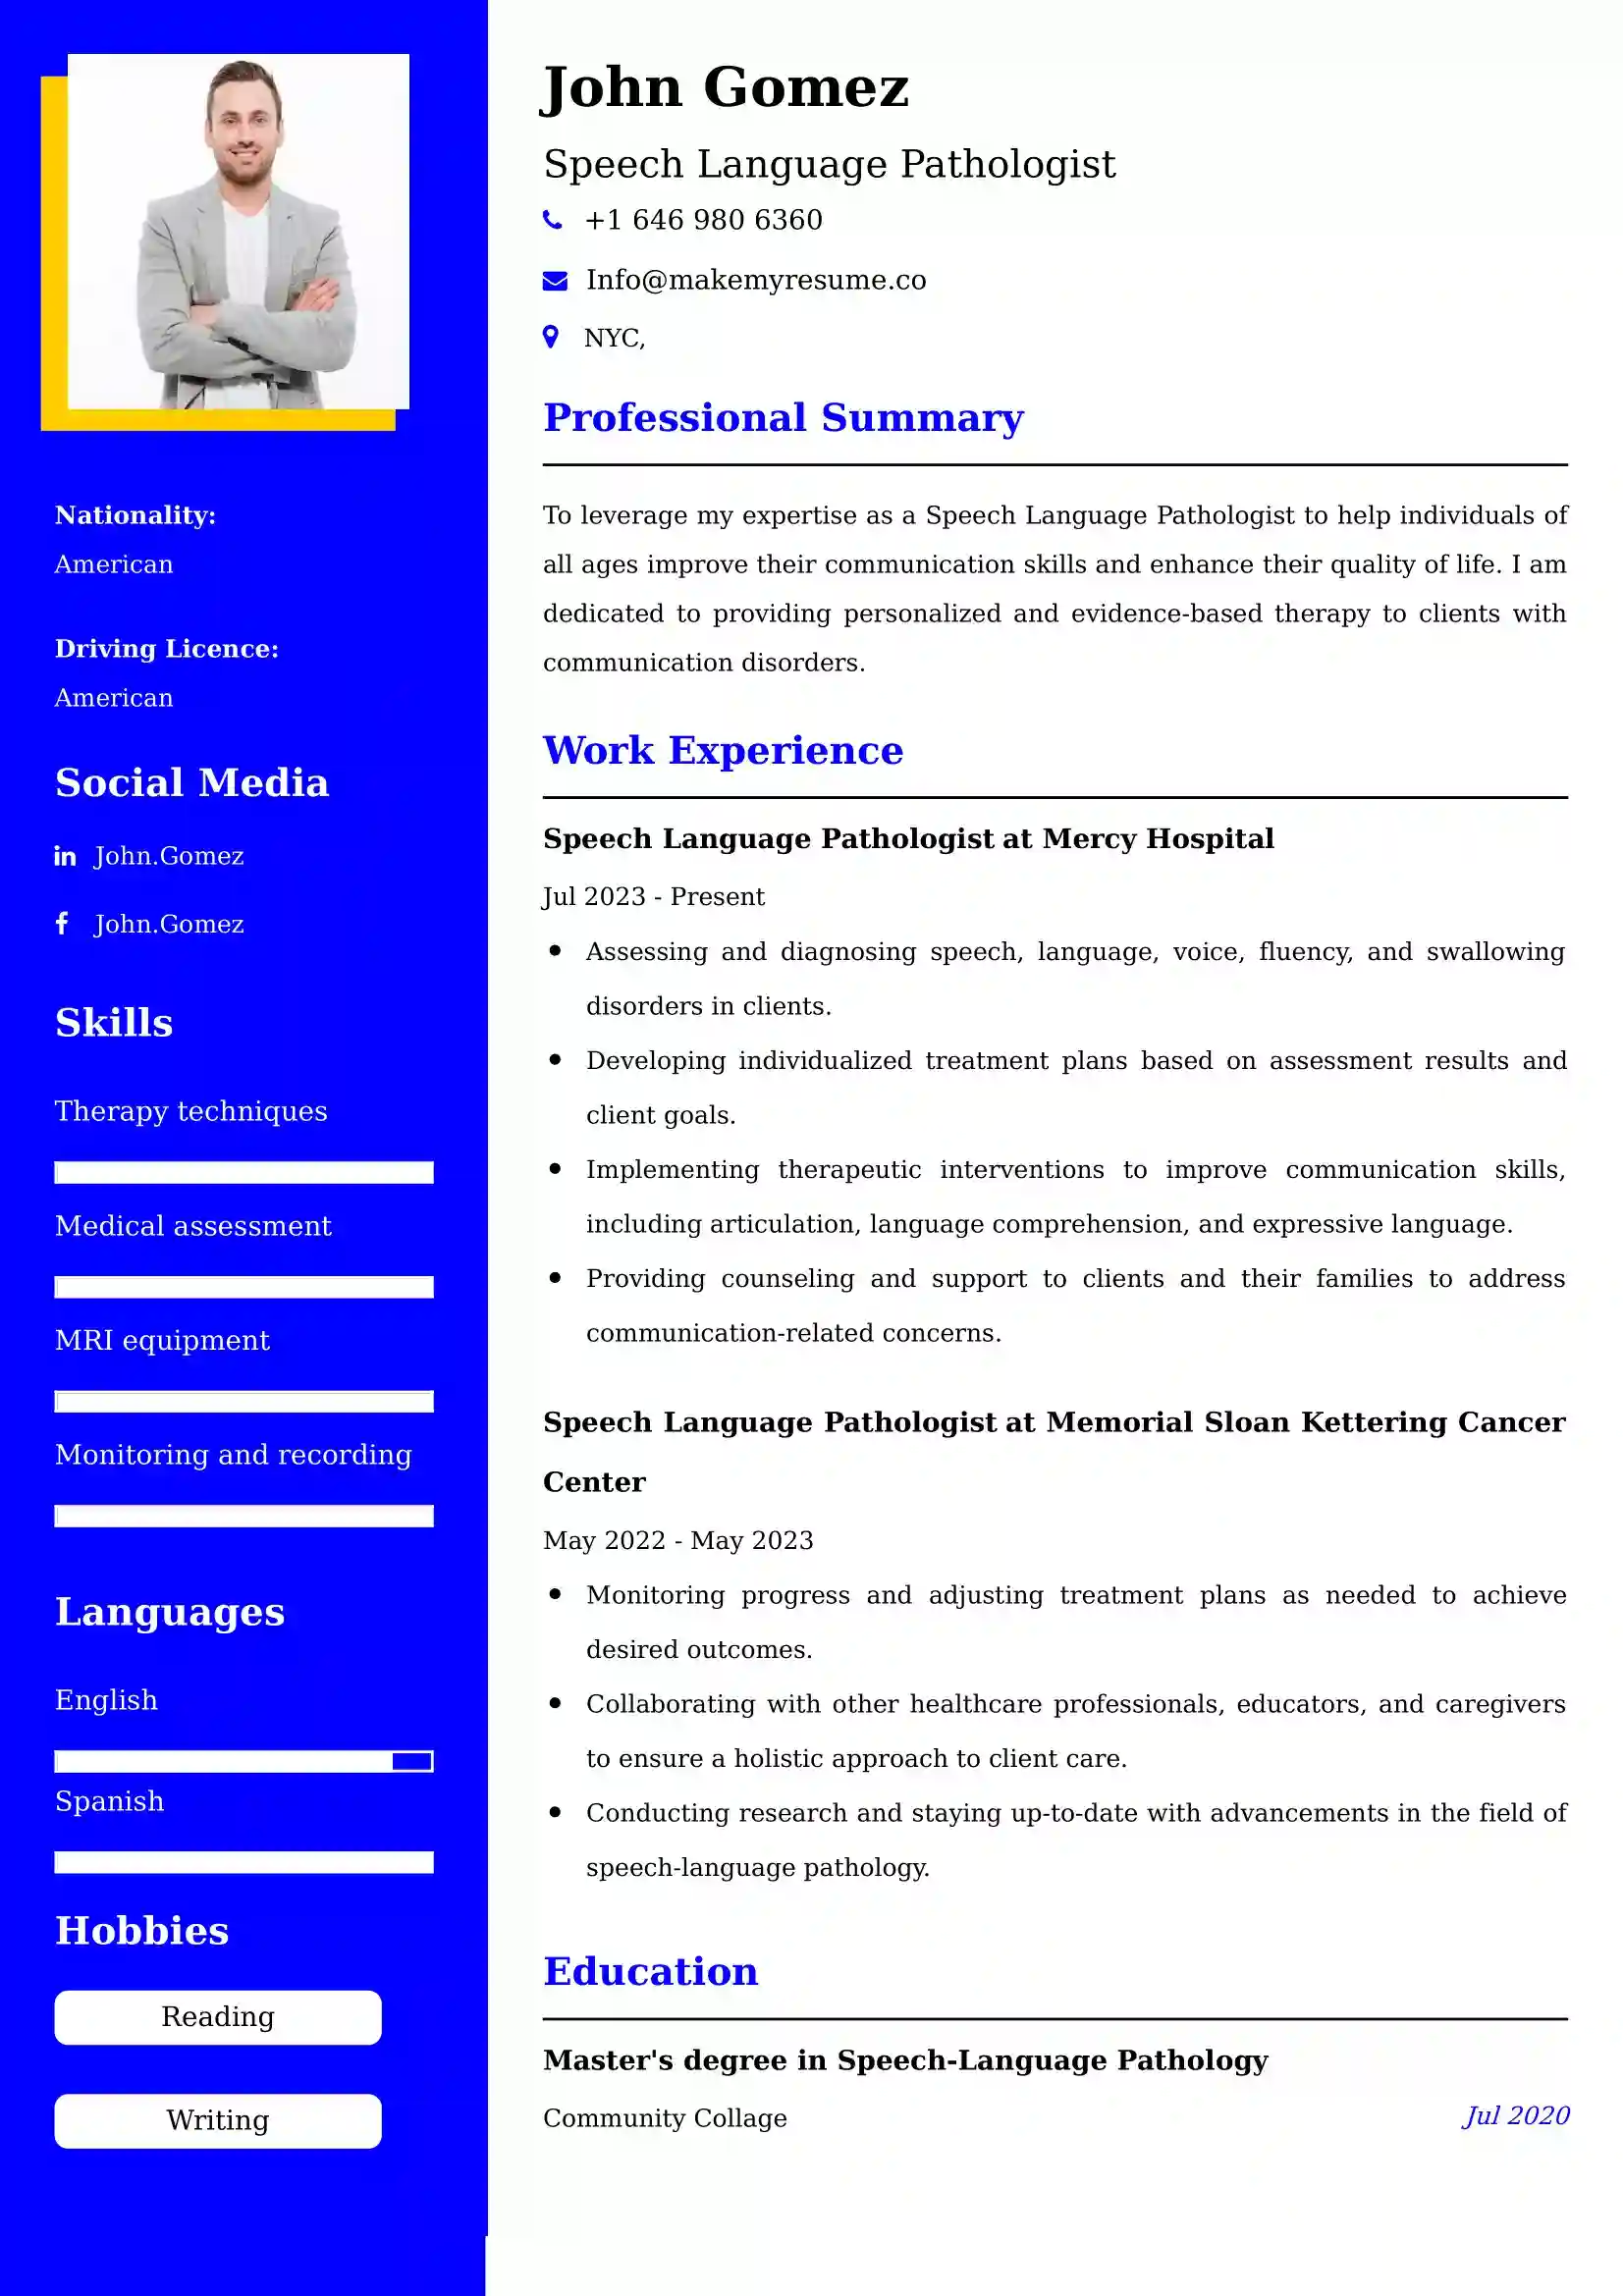 Speech Language Pathologist Resume Examples for UK Jobs - Tips and Guide